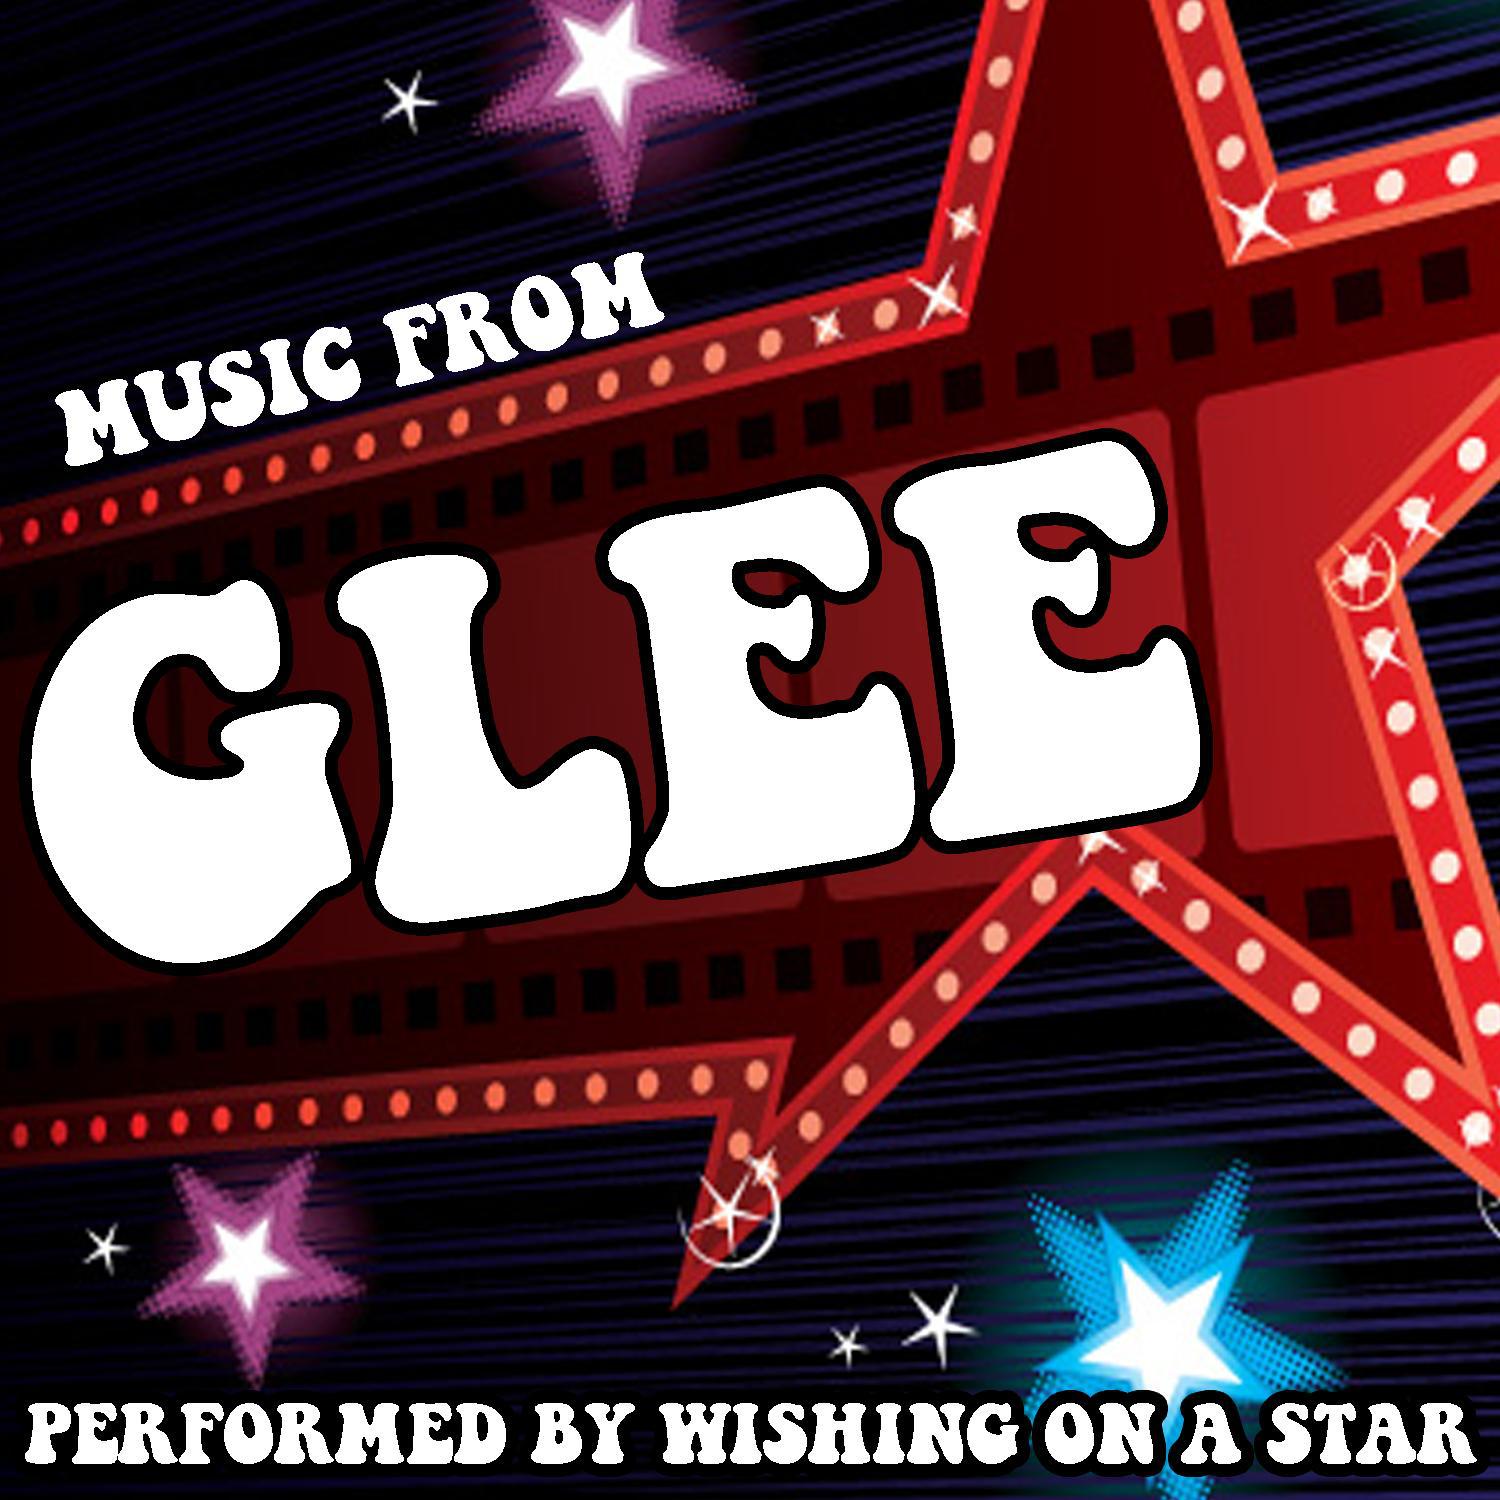 Music From: Glee